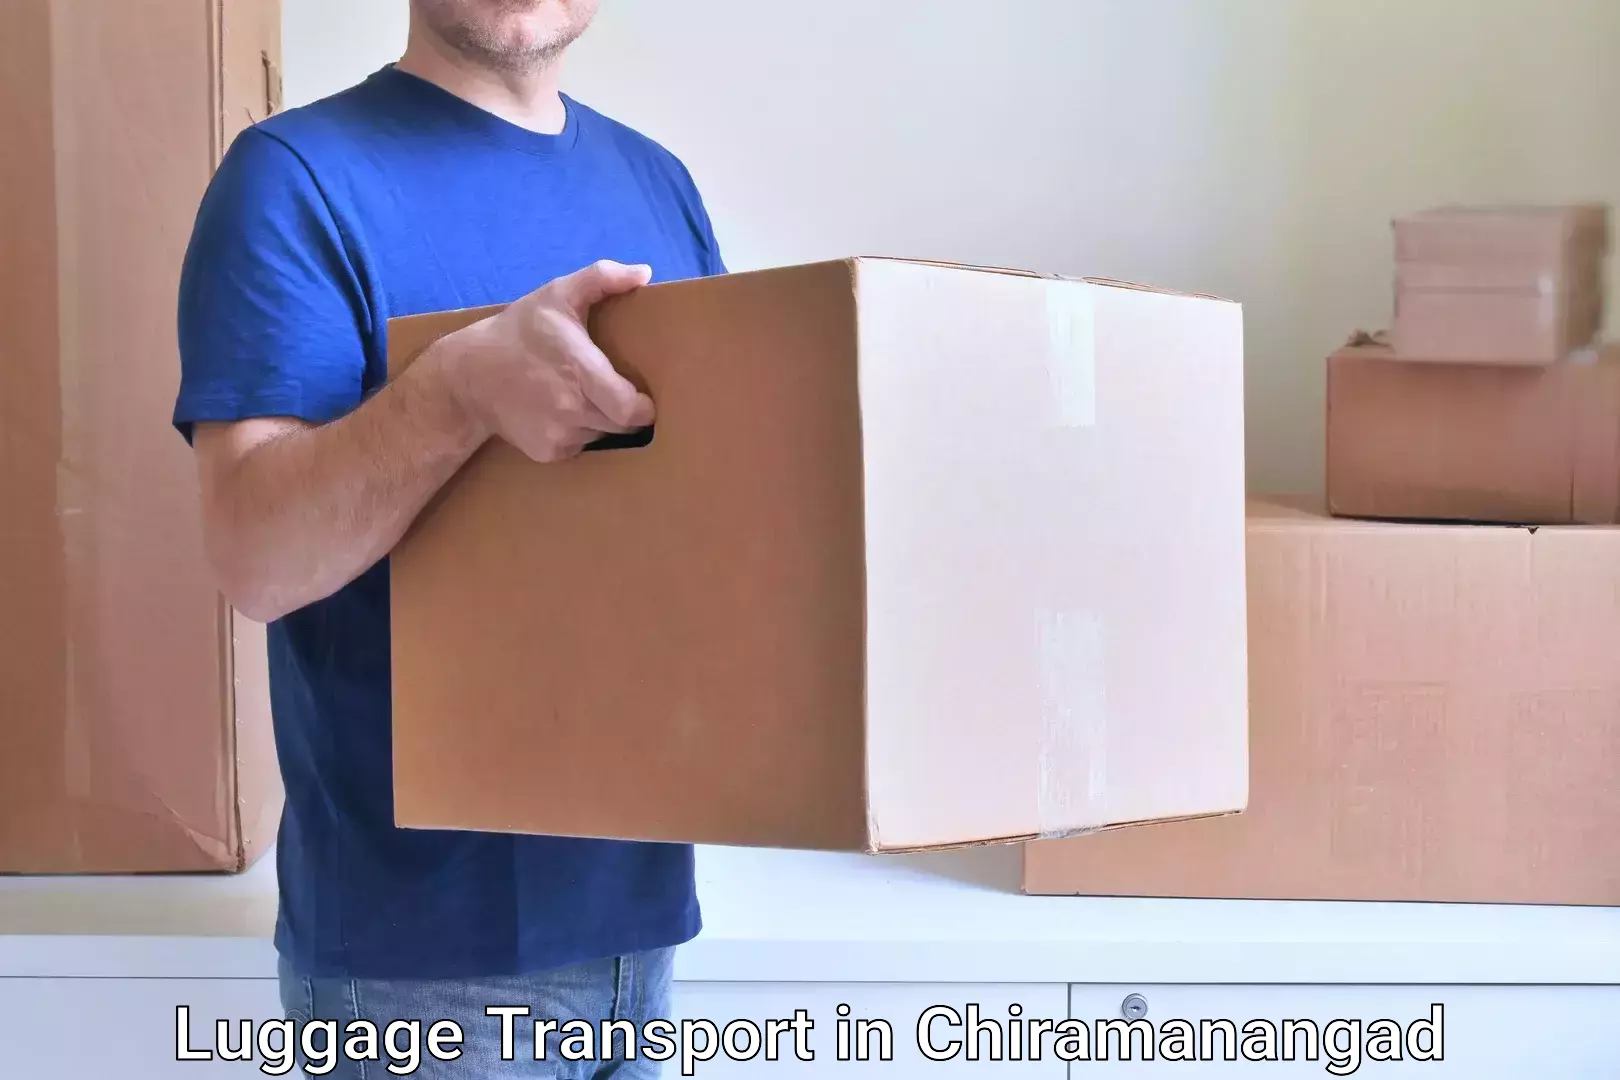 Luggage delivery system in Chiramanangad